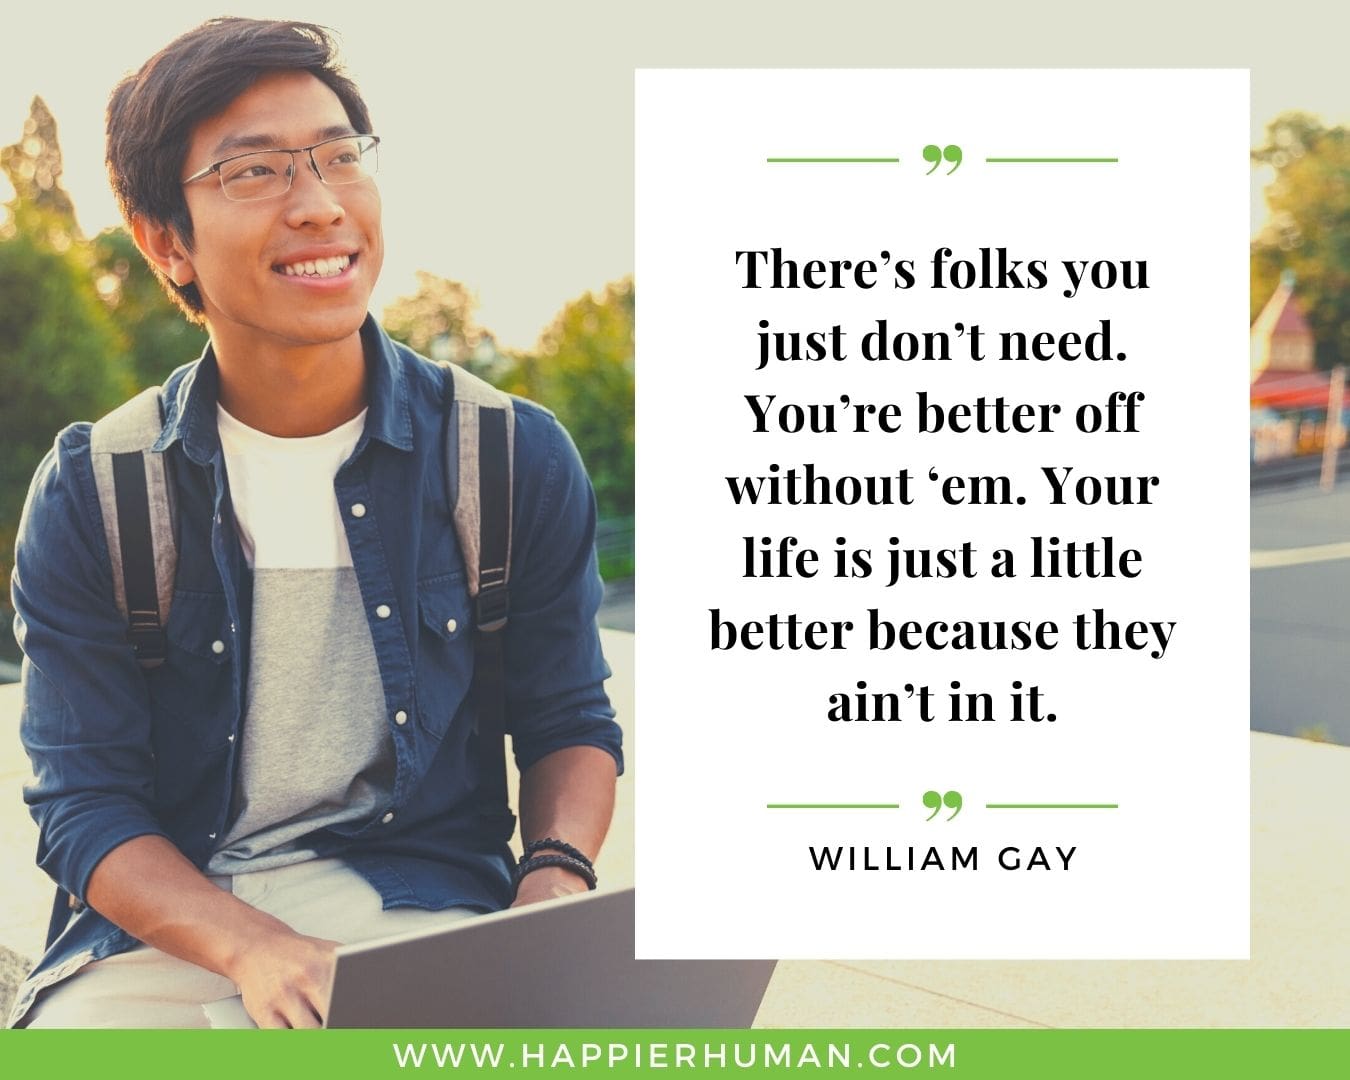 Toxic People Quotes - “There’s folks you just don’t need. You’re better off without ‘em. Your life is just a little better because they ain’t in it.” – William Gay